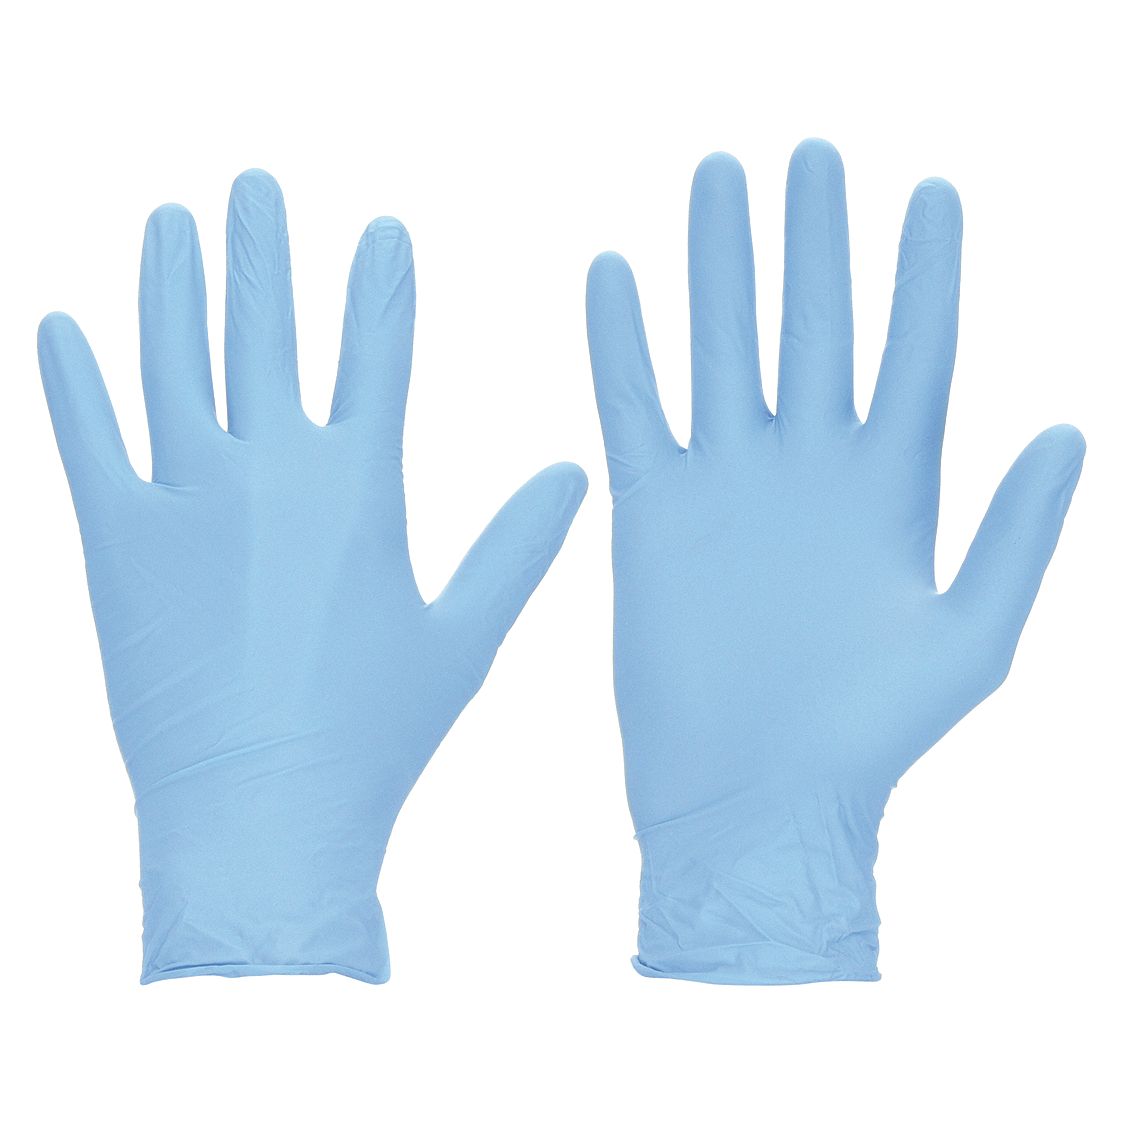 L Nitrile Mechanic and multi-purpose gloves 6 MIL by Challenger Gloves